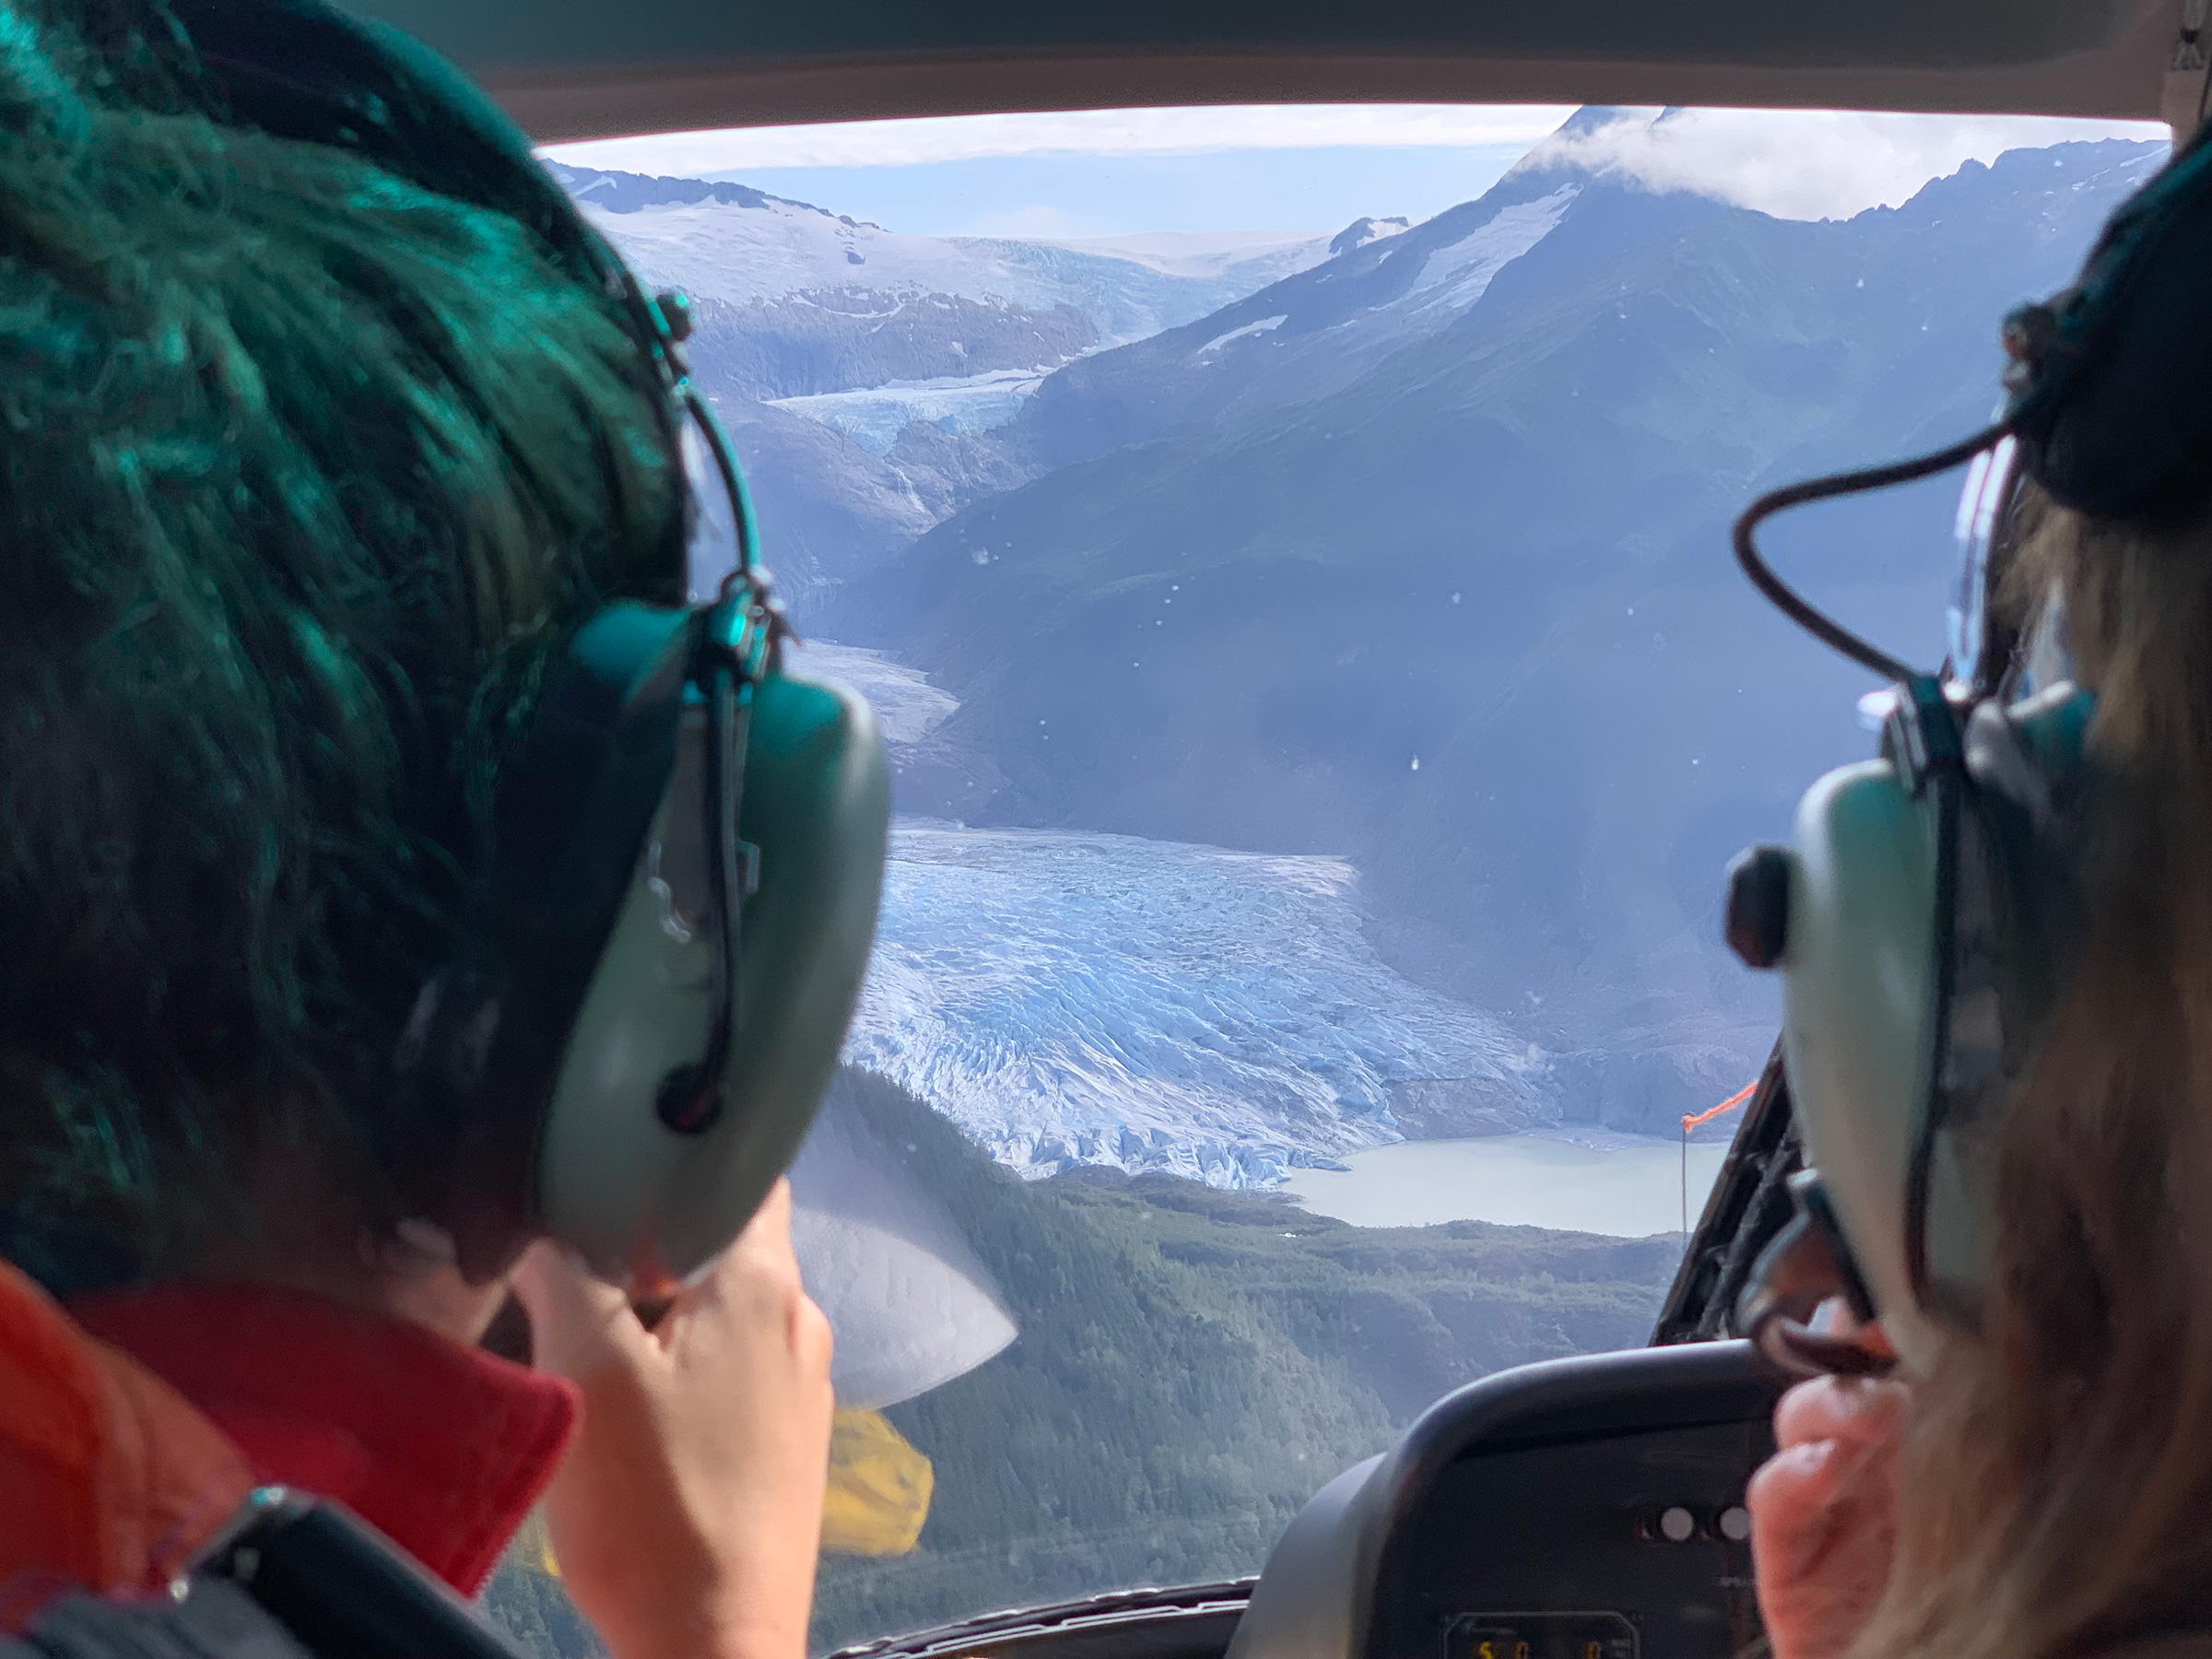 Flying into Camp 18 at the Juneau Icefield Research Program, the second oldest polar research station in the world, in July 2019.